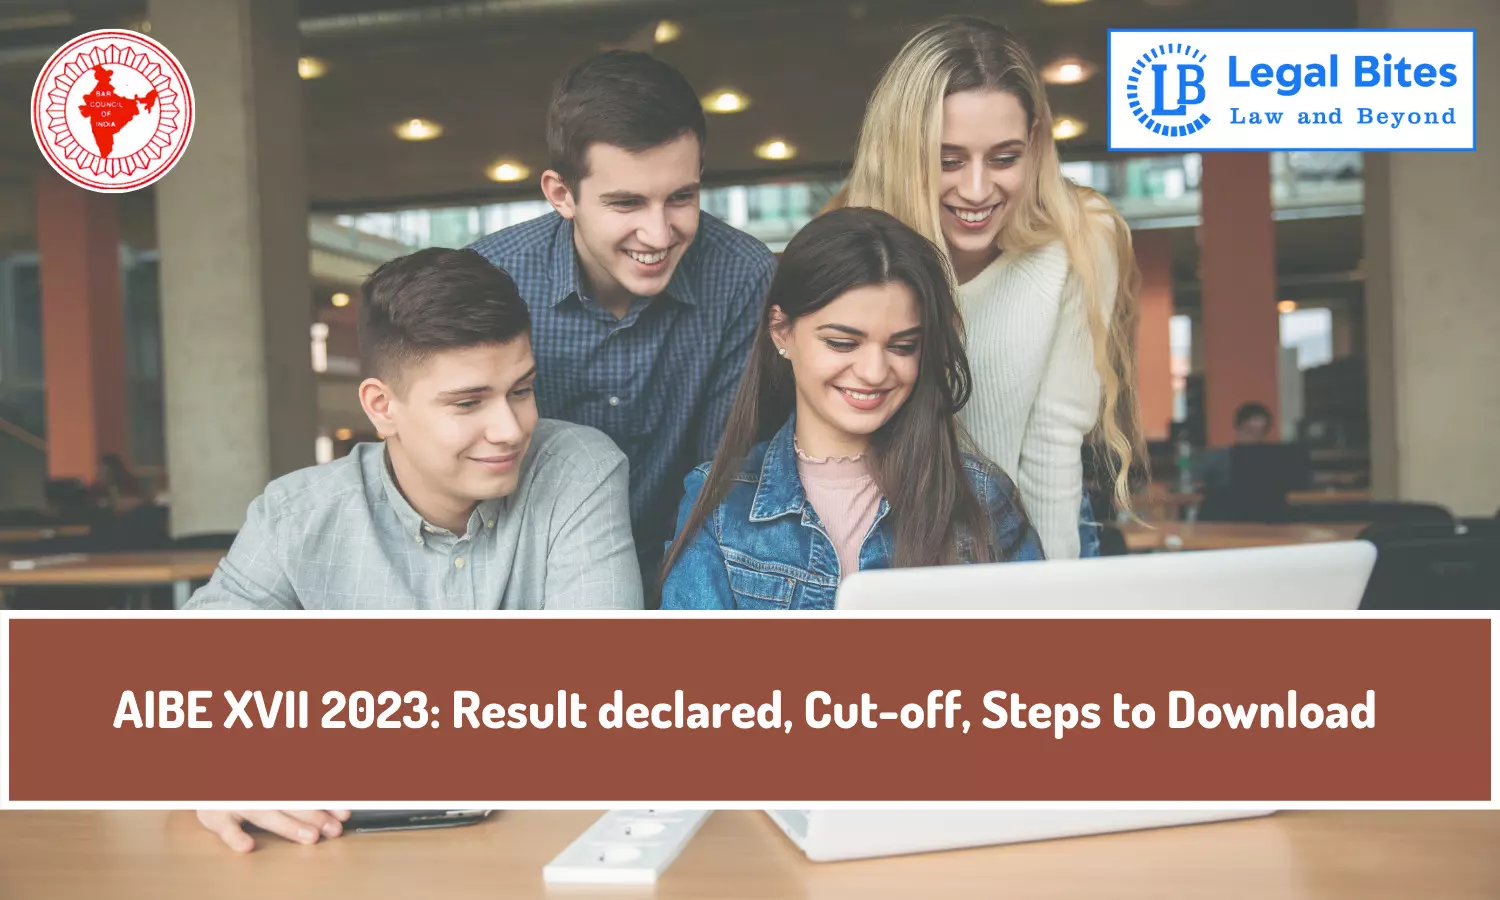 AIBE XVII 2023: Result Declared, Cut-off, Steps to Download